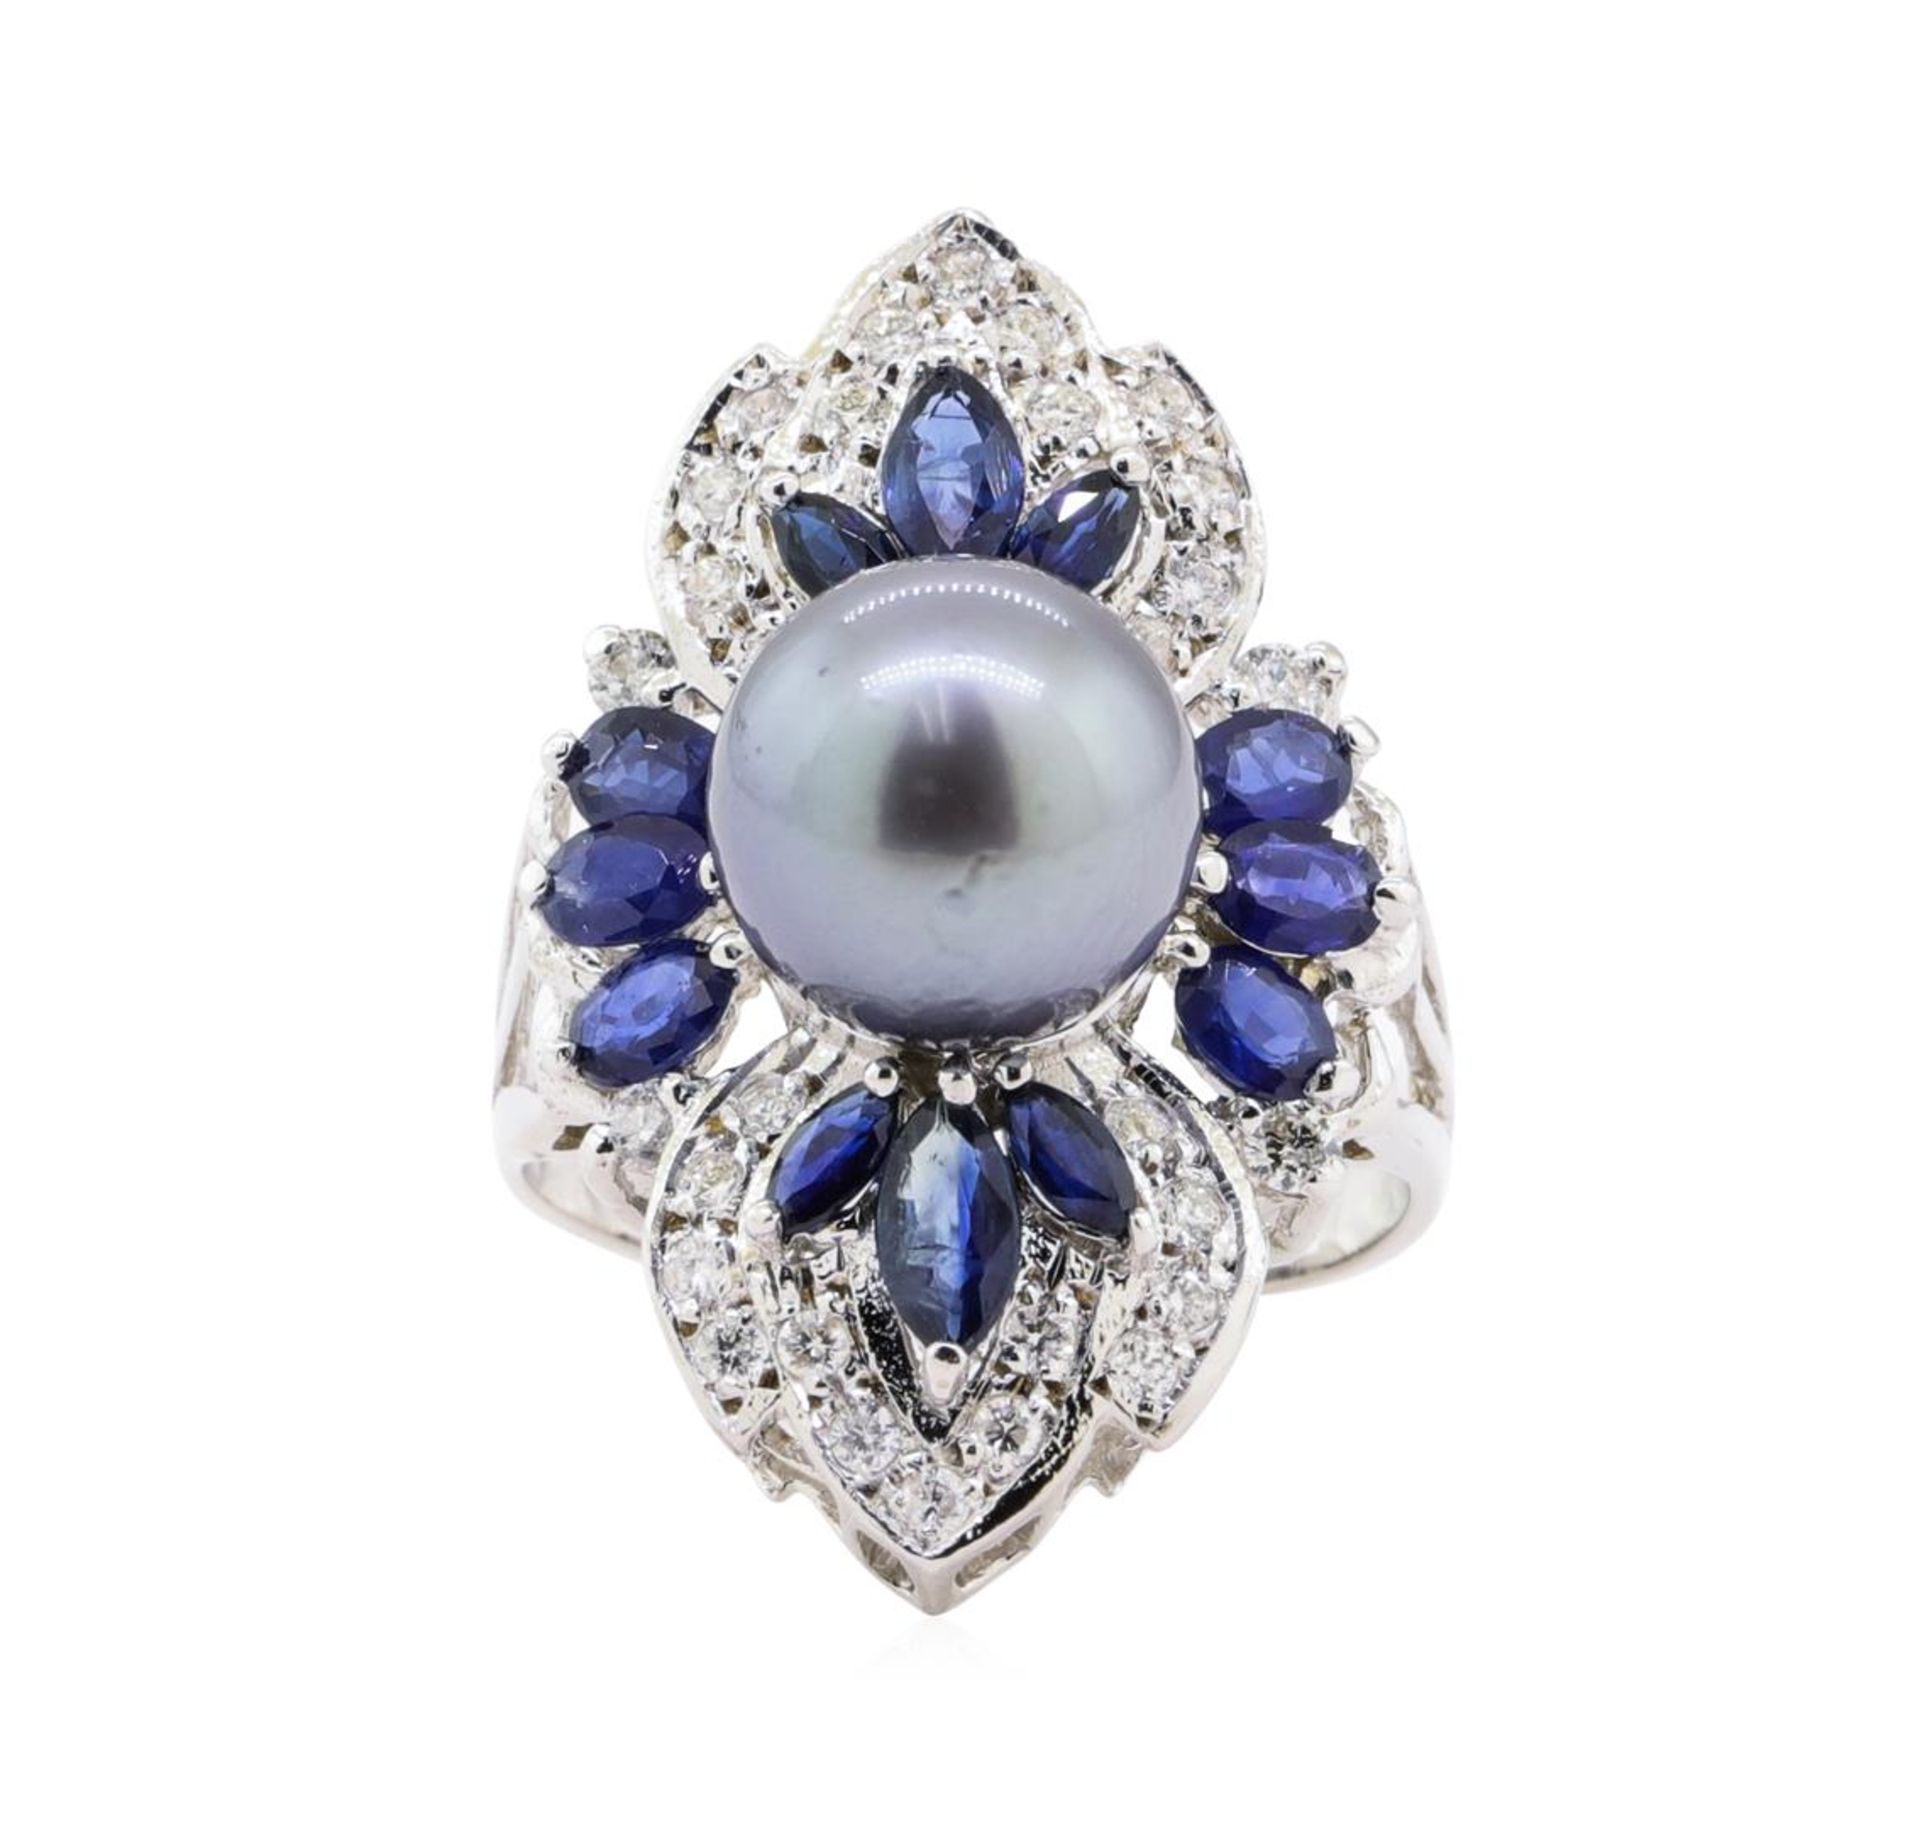 Pearl, Sapphire and Diamond Ring - 14KT White Gold - Image 2 of 5